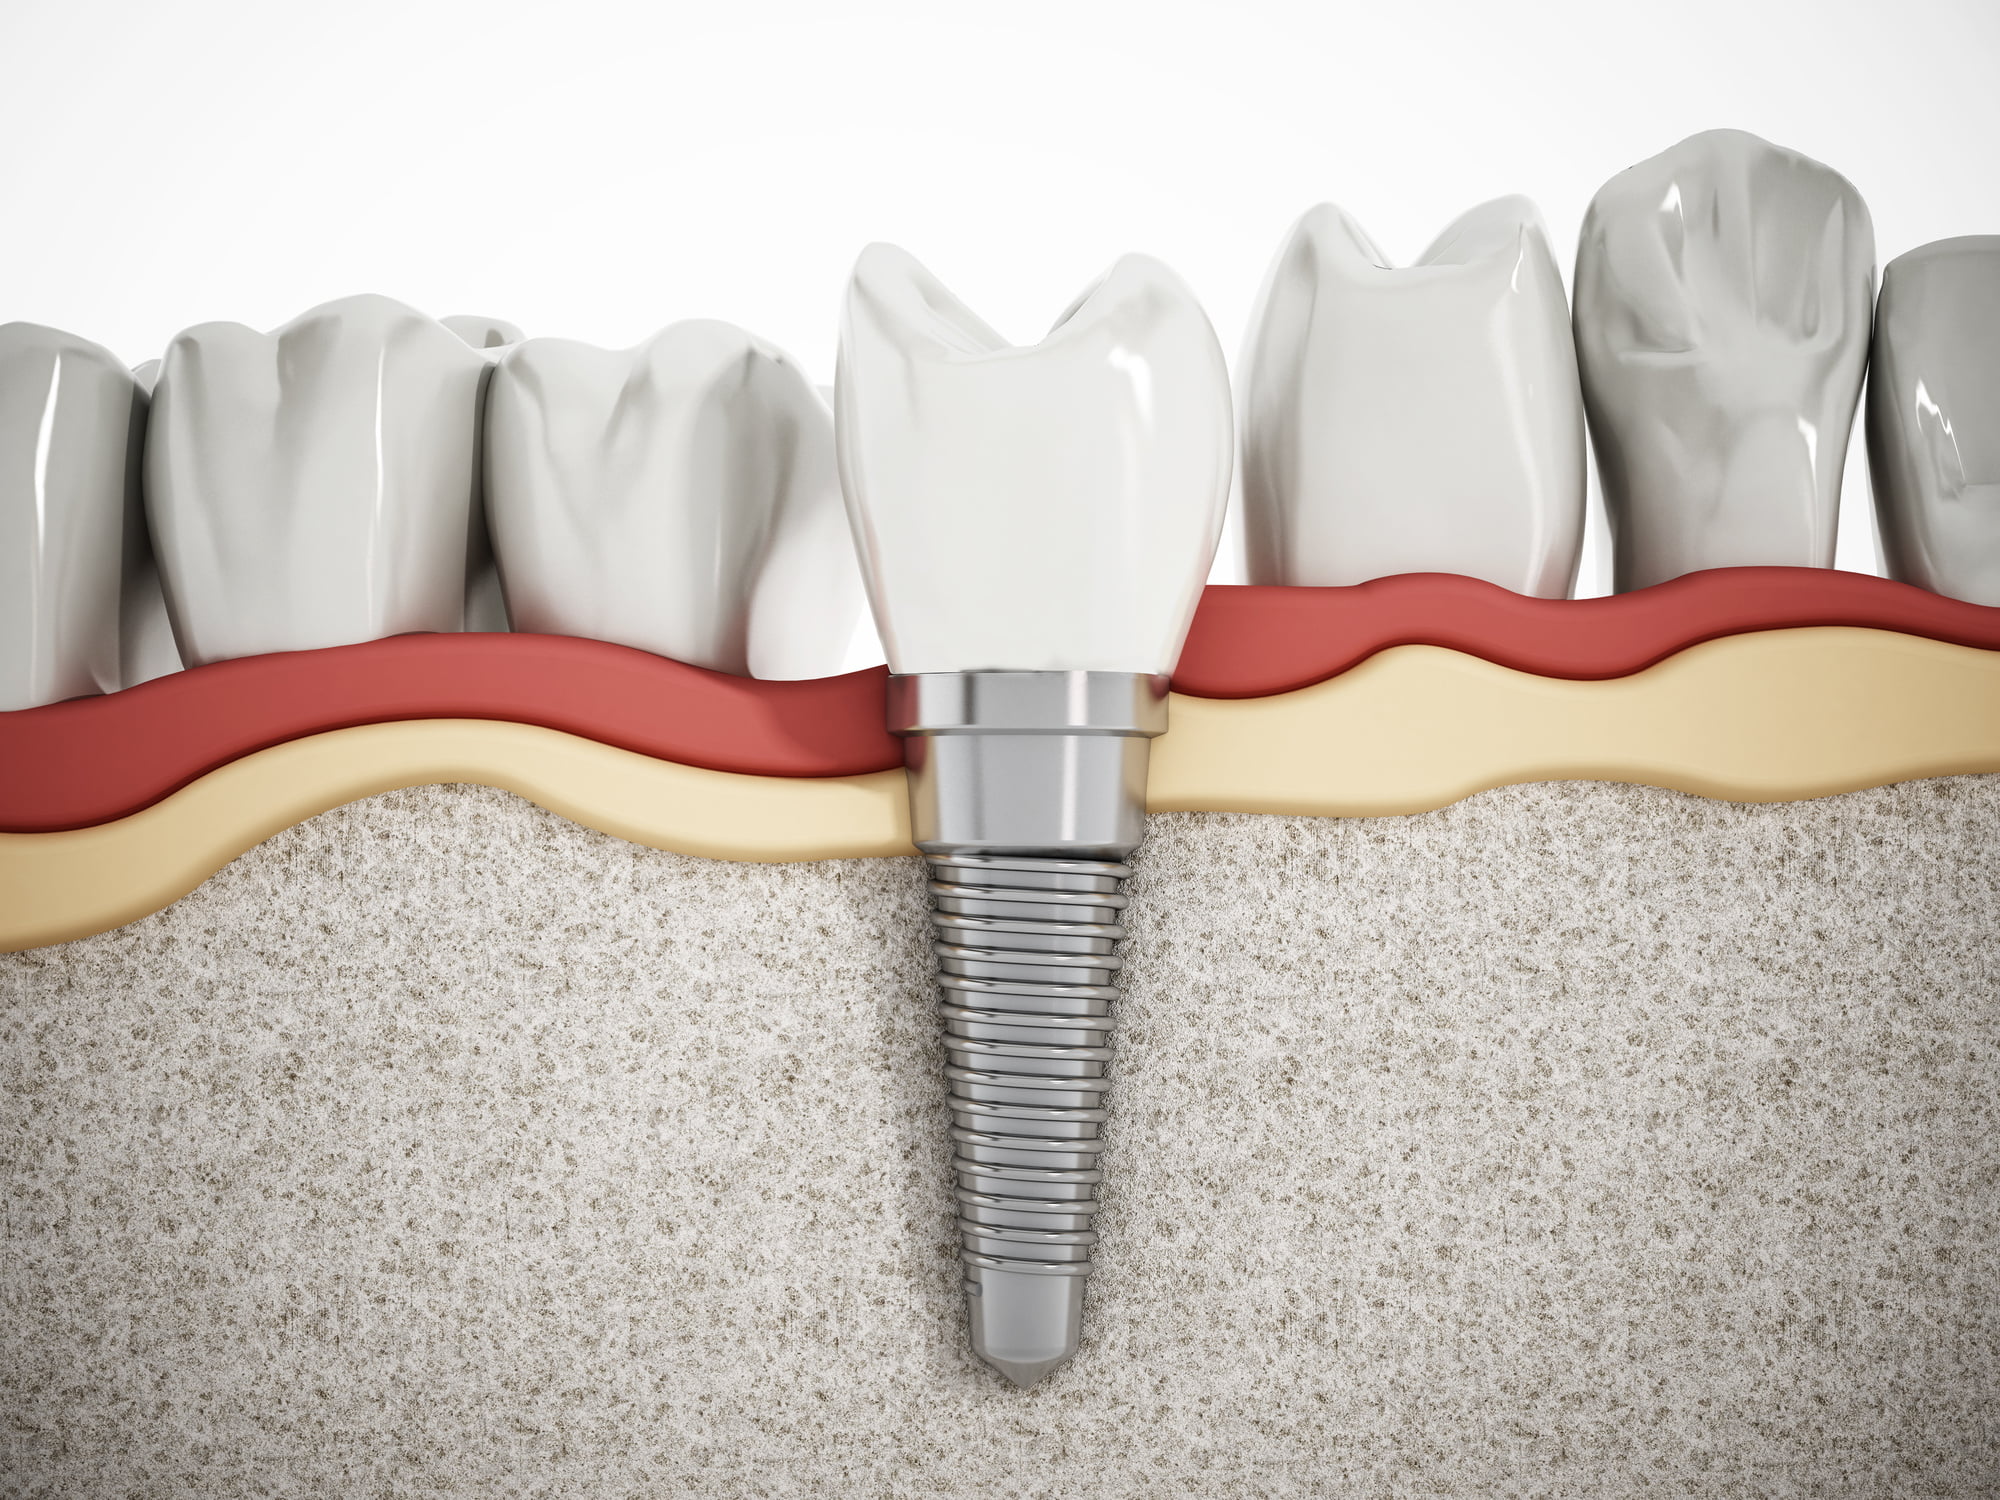 Dental implants might be a great investment for your dental health. Click here for a guide to the average dental implant cost in 2023.